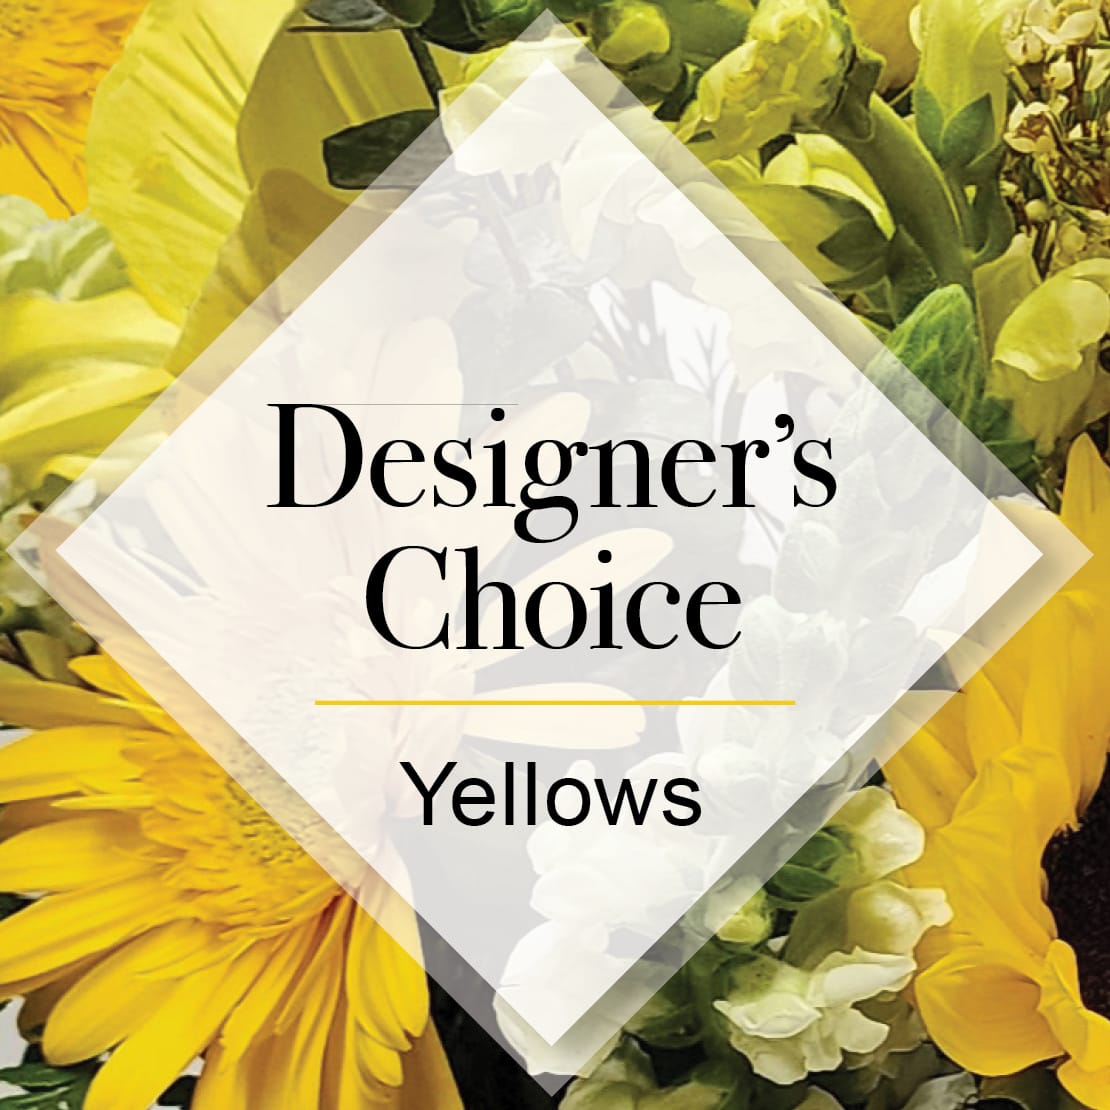 Designers Choice Yellow - A selection that will be predominately the color that you have chosen with accents and greenery to compliment. The designers have the flexibility to create something unique and beautiful for you and is often the best value for you. If you have specifics you would like to request please include in the comments / special instructions area when placing your order.